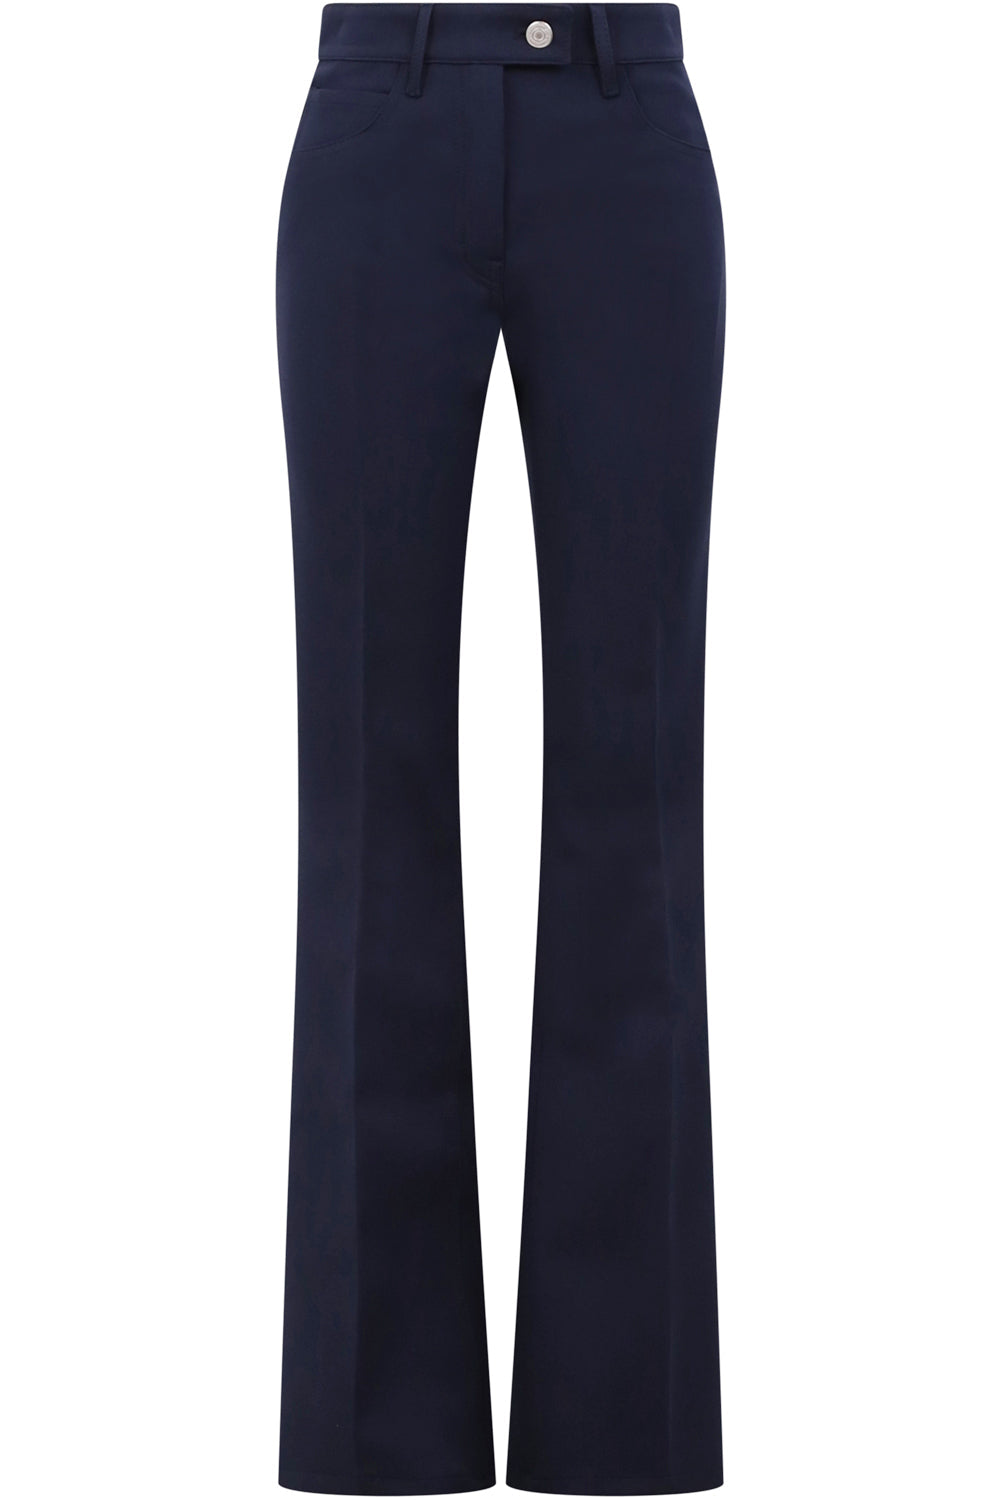 COURREGES RTW BOOTCUT TROUSERS NAVY